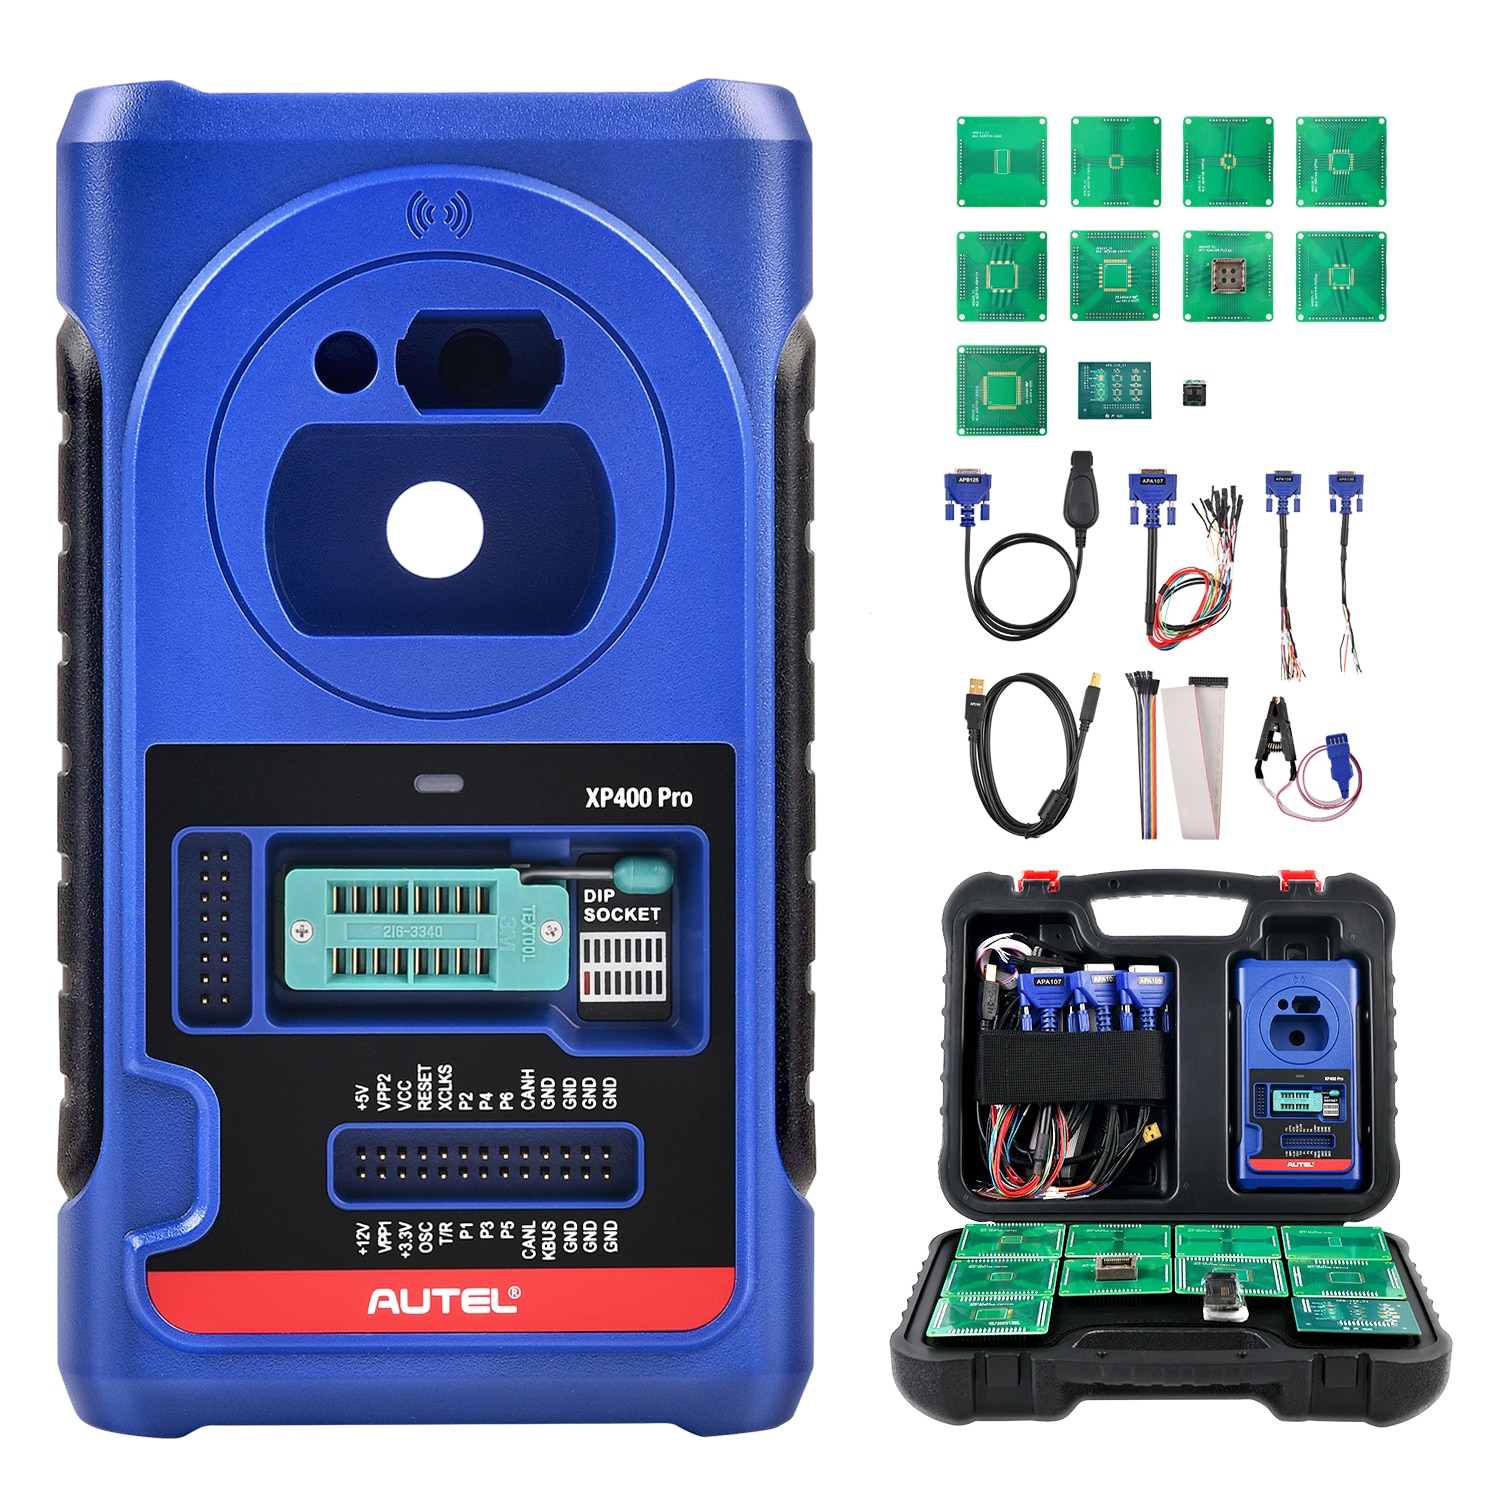 Autel-MaxiIM-IM608-Pro-with-IMMO-XP400-Pro-Key-Programming-Tool-J2534-Reprogrammer-30-Services-Functions-All-Systems-Diagnosis-1005002666543661